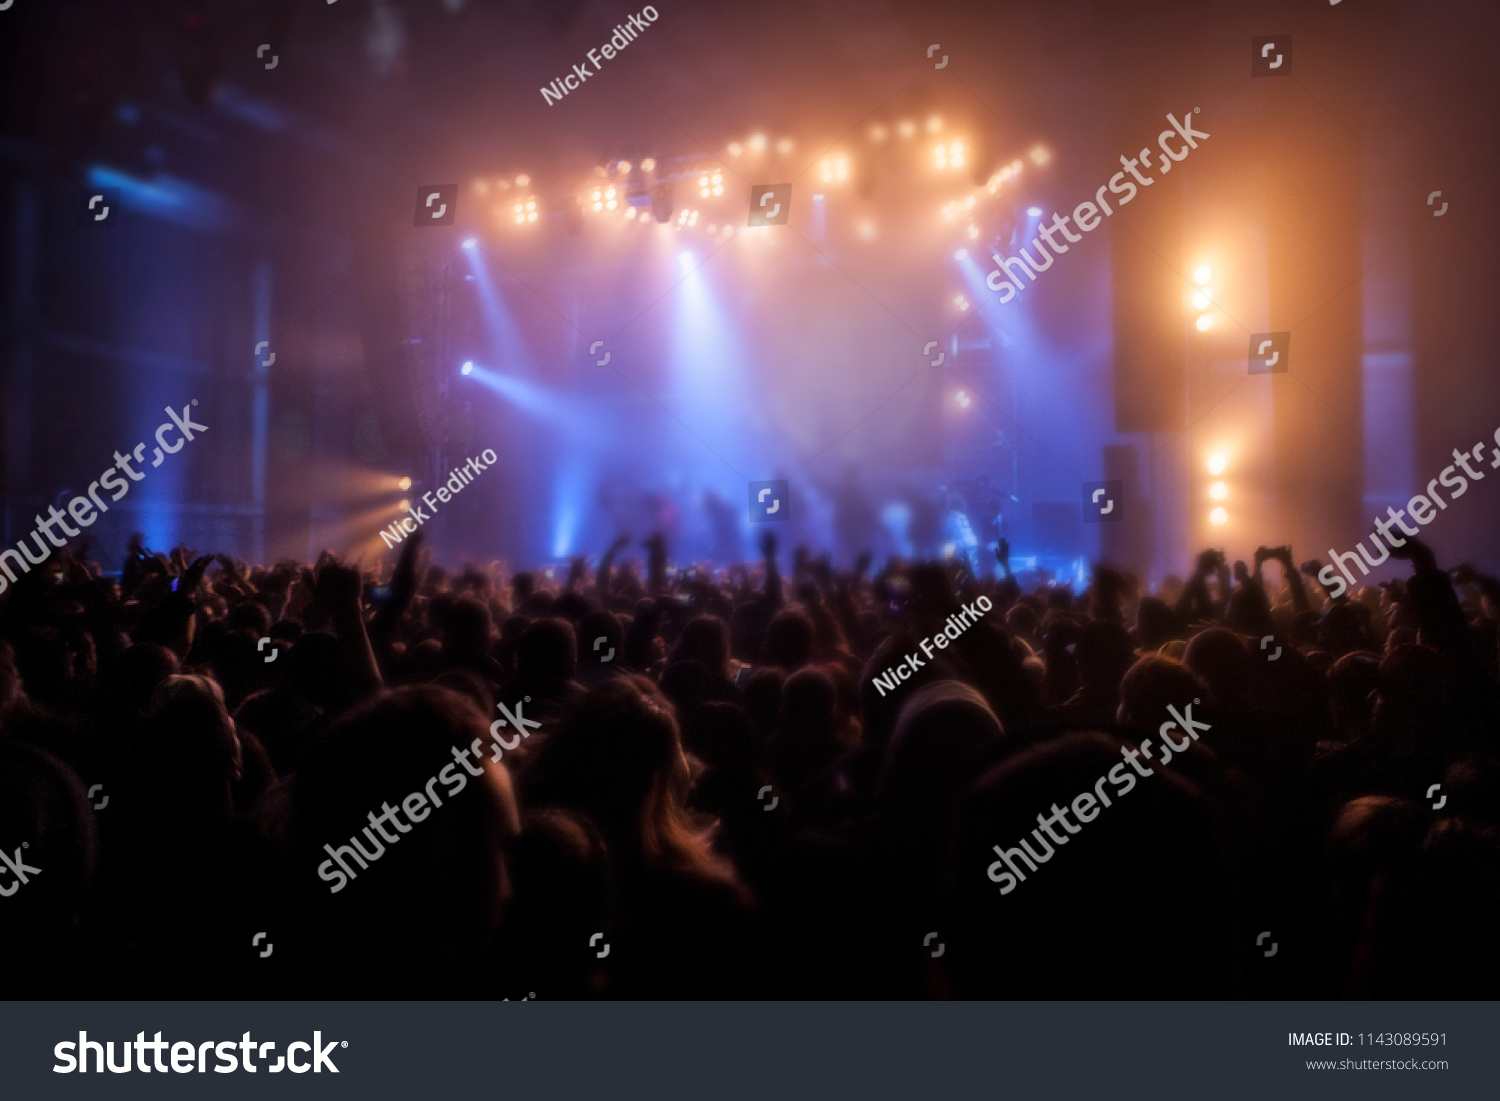 Musical concert. Music festival. People in the concert hall at the disco . Singer in front of the audience. Fans at the concert. Blurred image / blurred photo. #1143089591